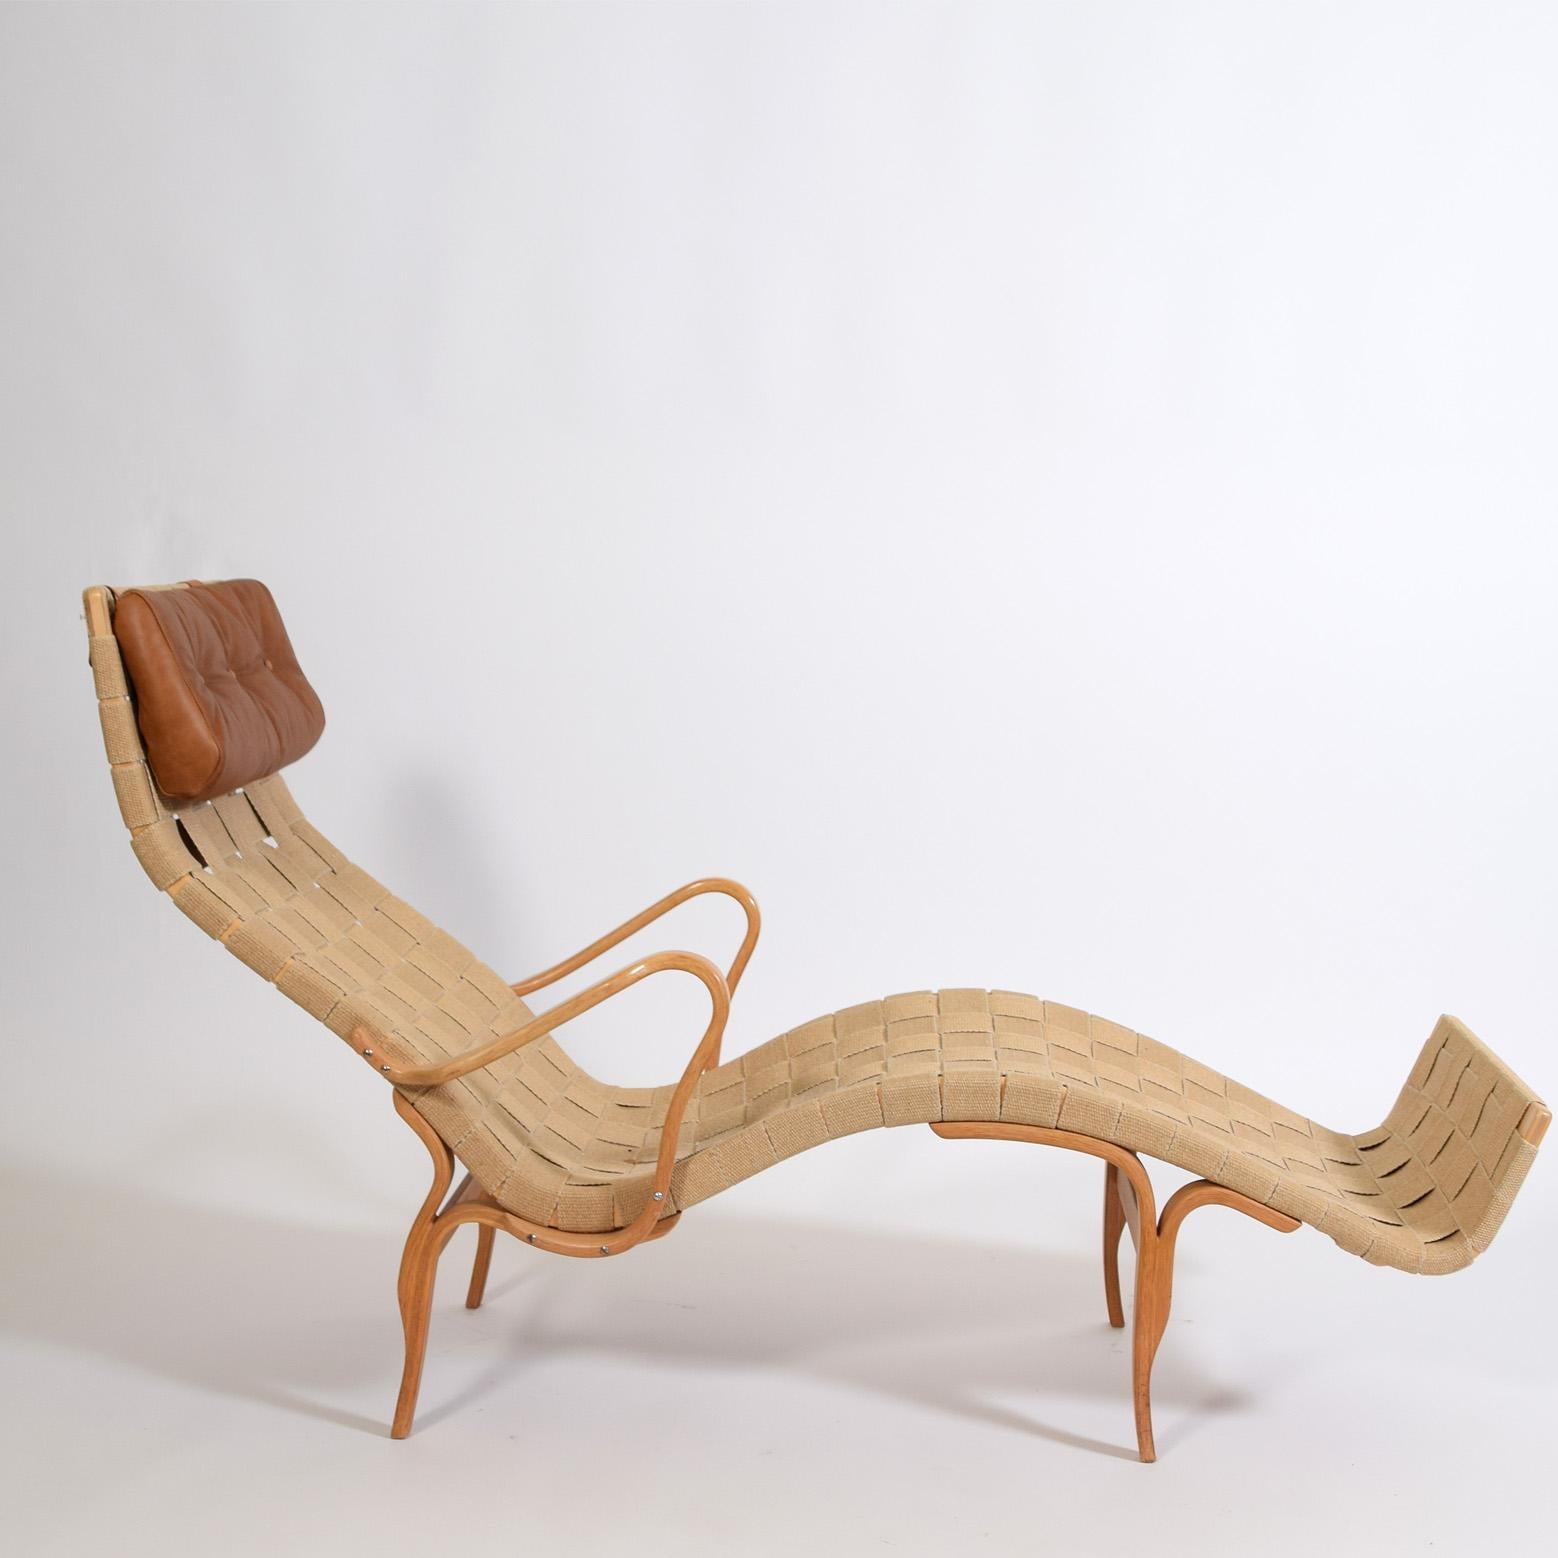 Iconic chaise longue by Swedish designer Bruno Mathsson, in bent birchwood with canvas weave fabric and brown leather head rest, designed in 1960's, Scandinavian modern.